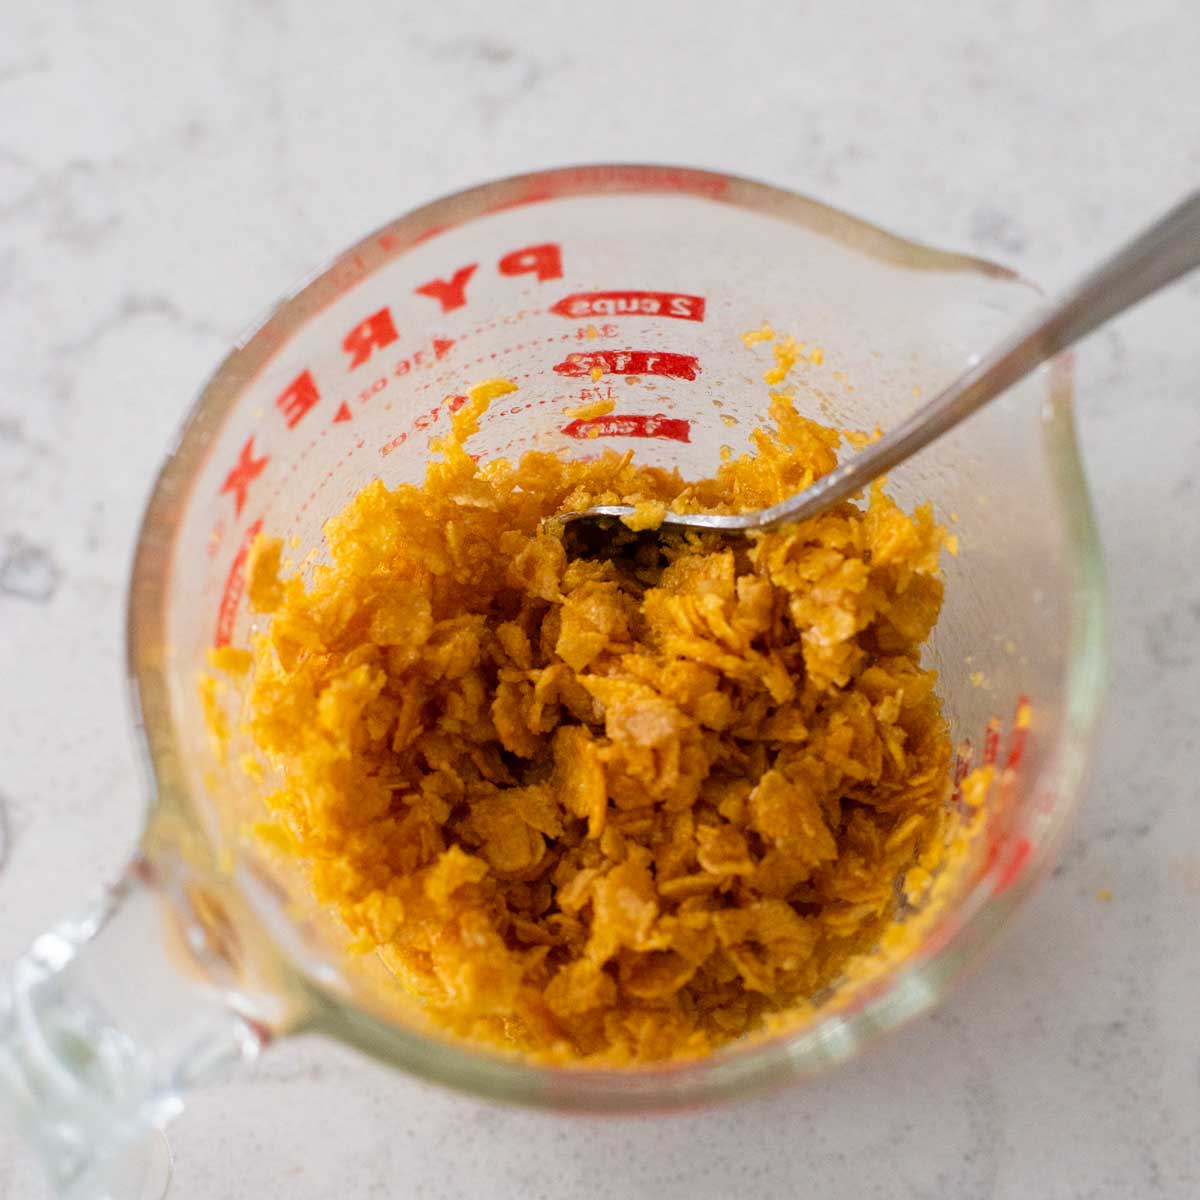 The crushed cornflakes have been mixed with melted butter in a measuring cup.